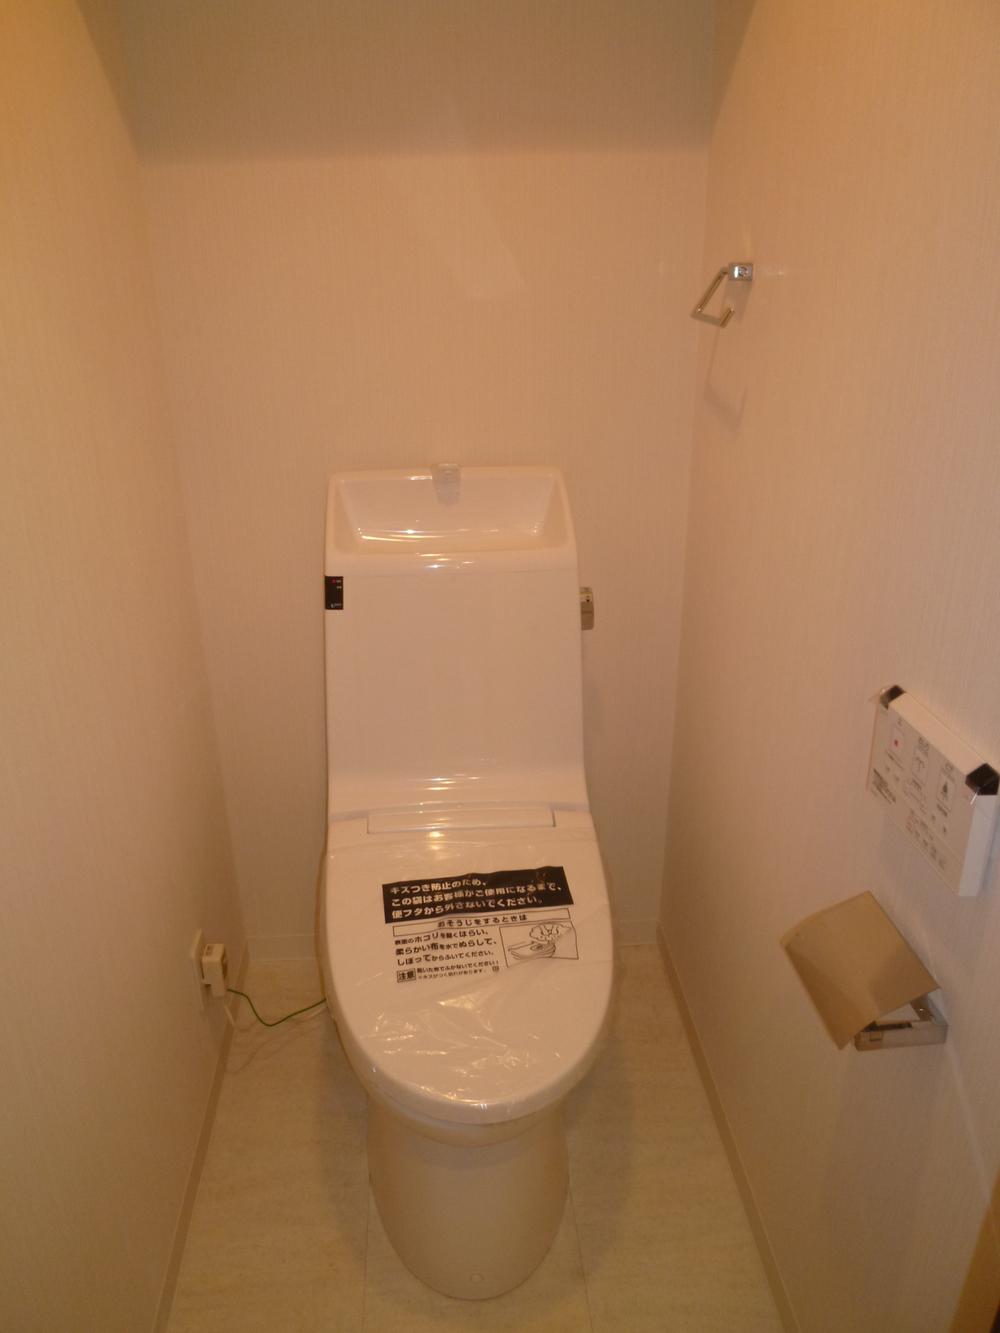 Toilet. High-function bidet with a toilet